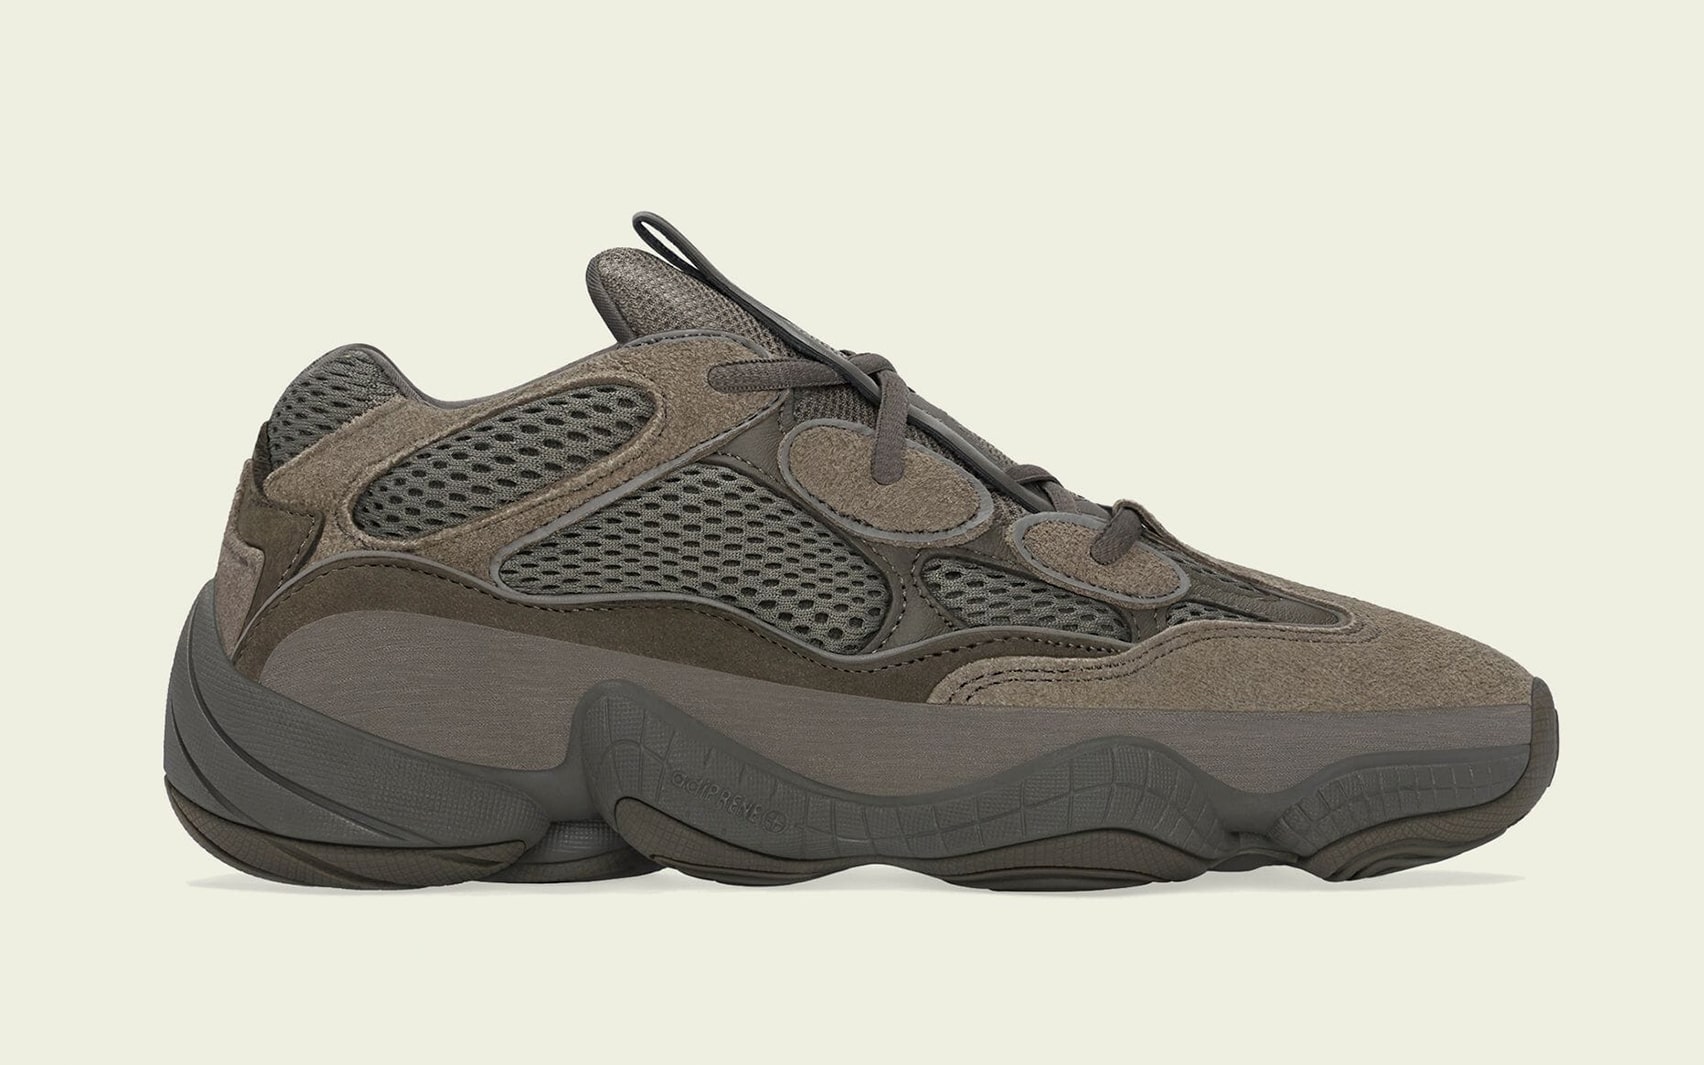 adidas-yeezy-500-brown-clay-GX3606-release-date-1